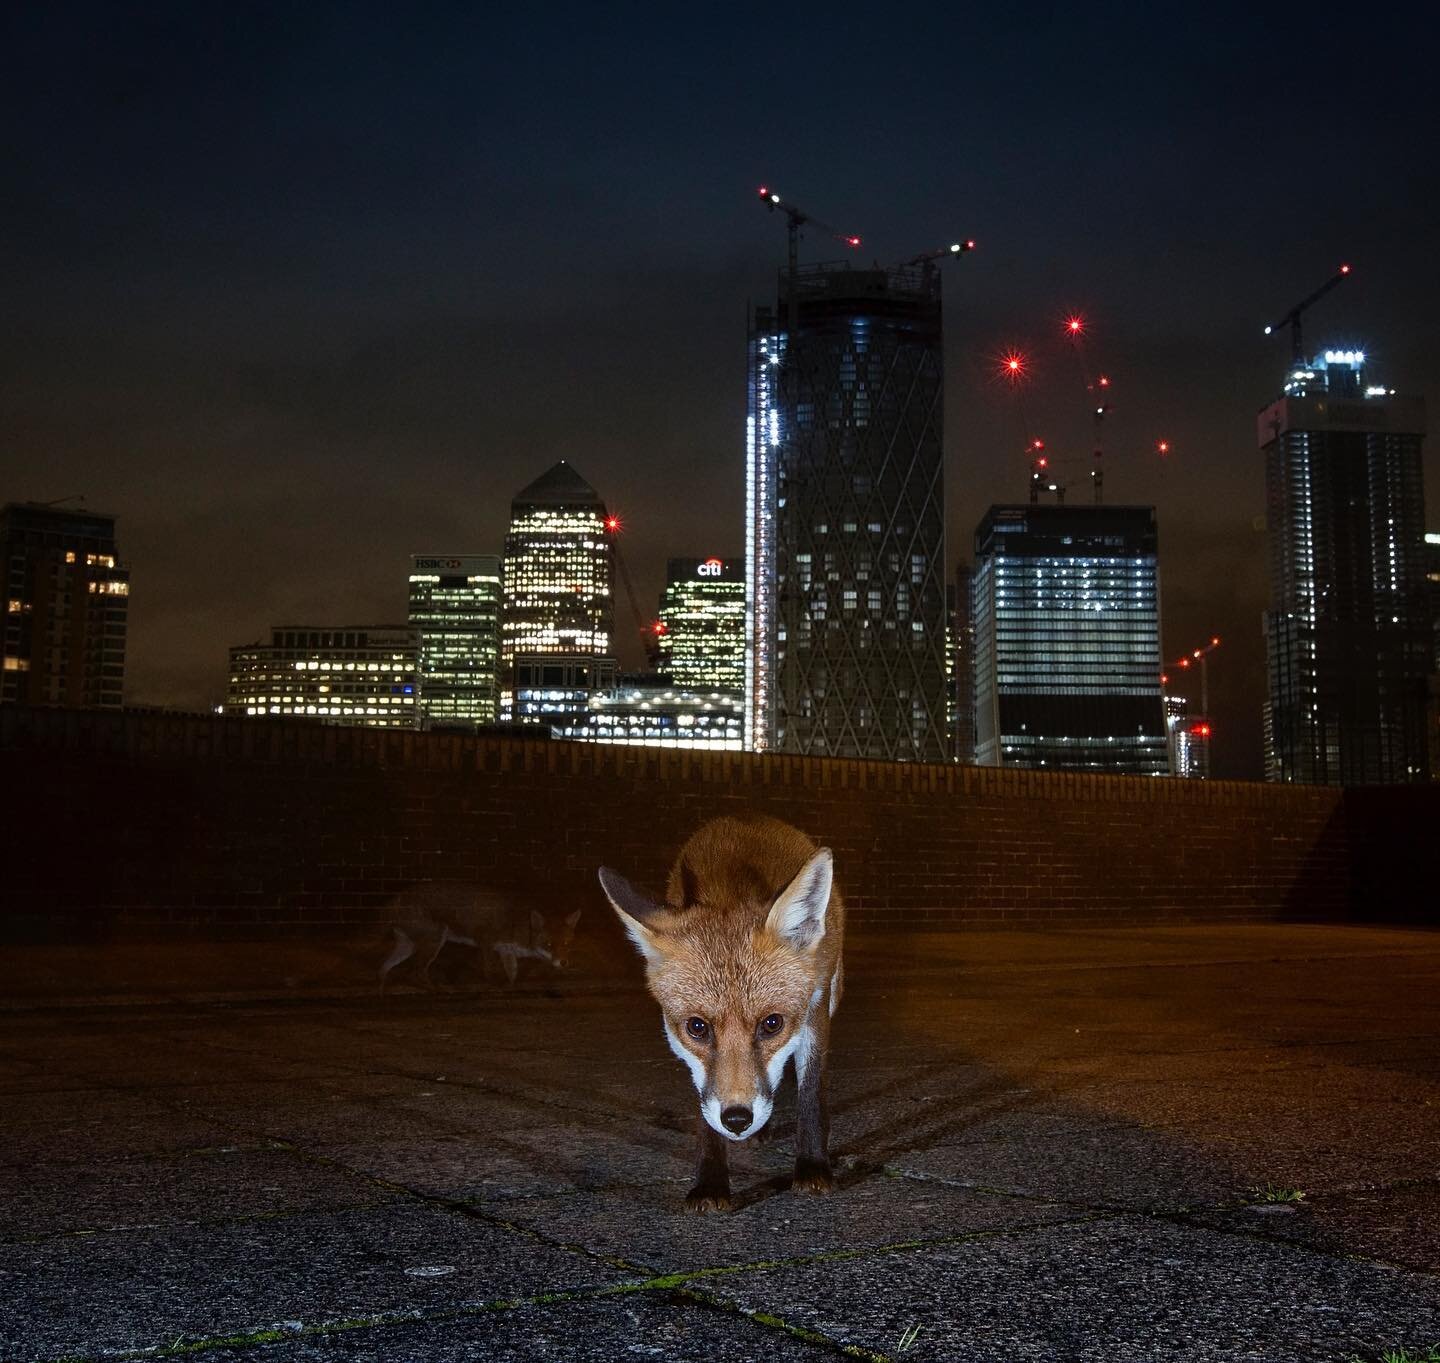 City life...

🌃 In the early hours, a pair of urban Foxes skulk along a riverside footpath in central London. I love watching wildlife thriving in densely populated places like this. Despite the threats of rapidly expanding urban populations on surr